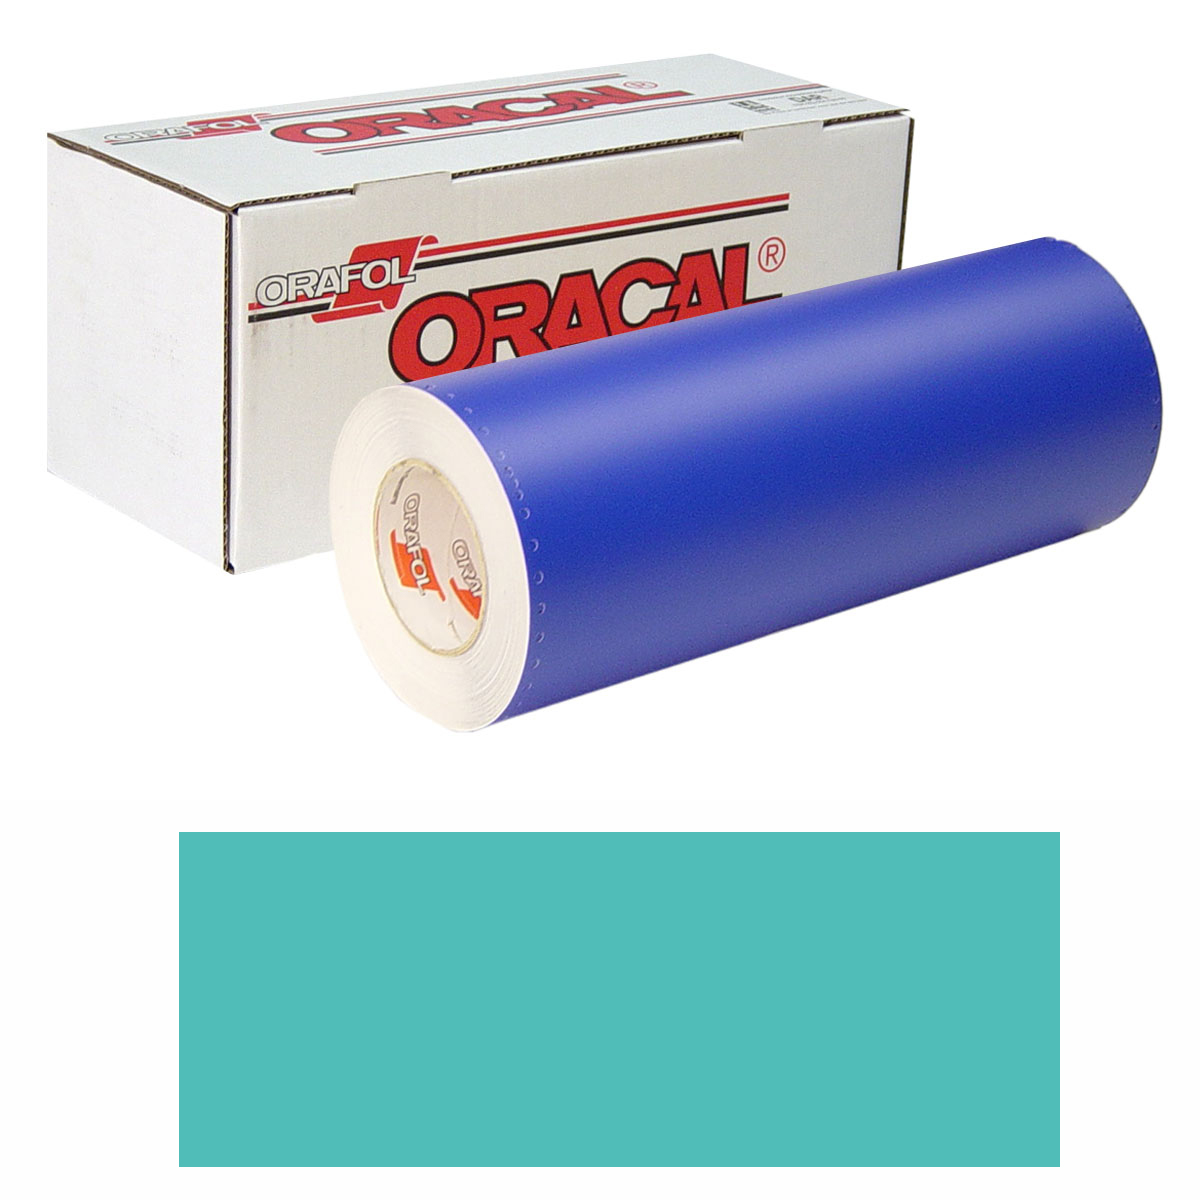 ORACAL 8300 Unp 24in X 50yd 054 Turquoise